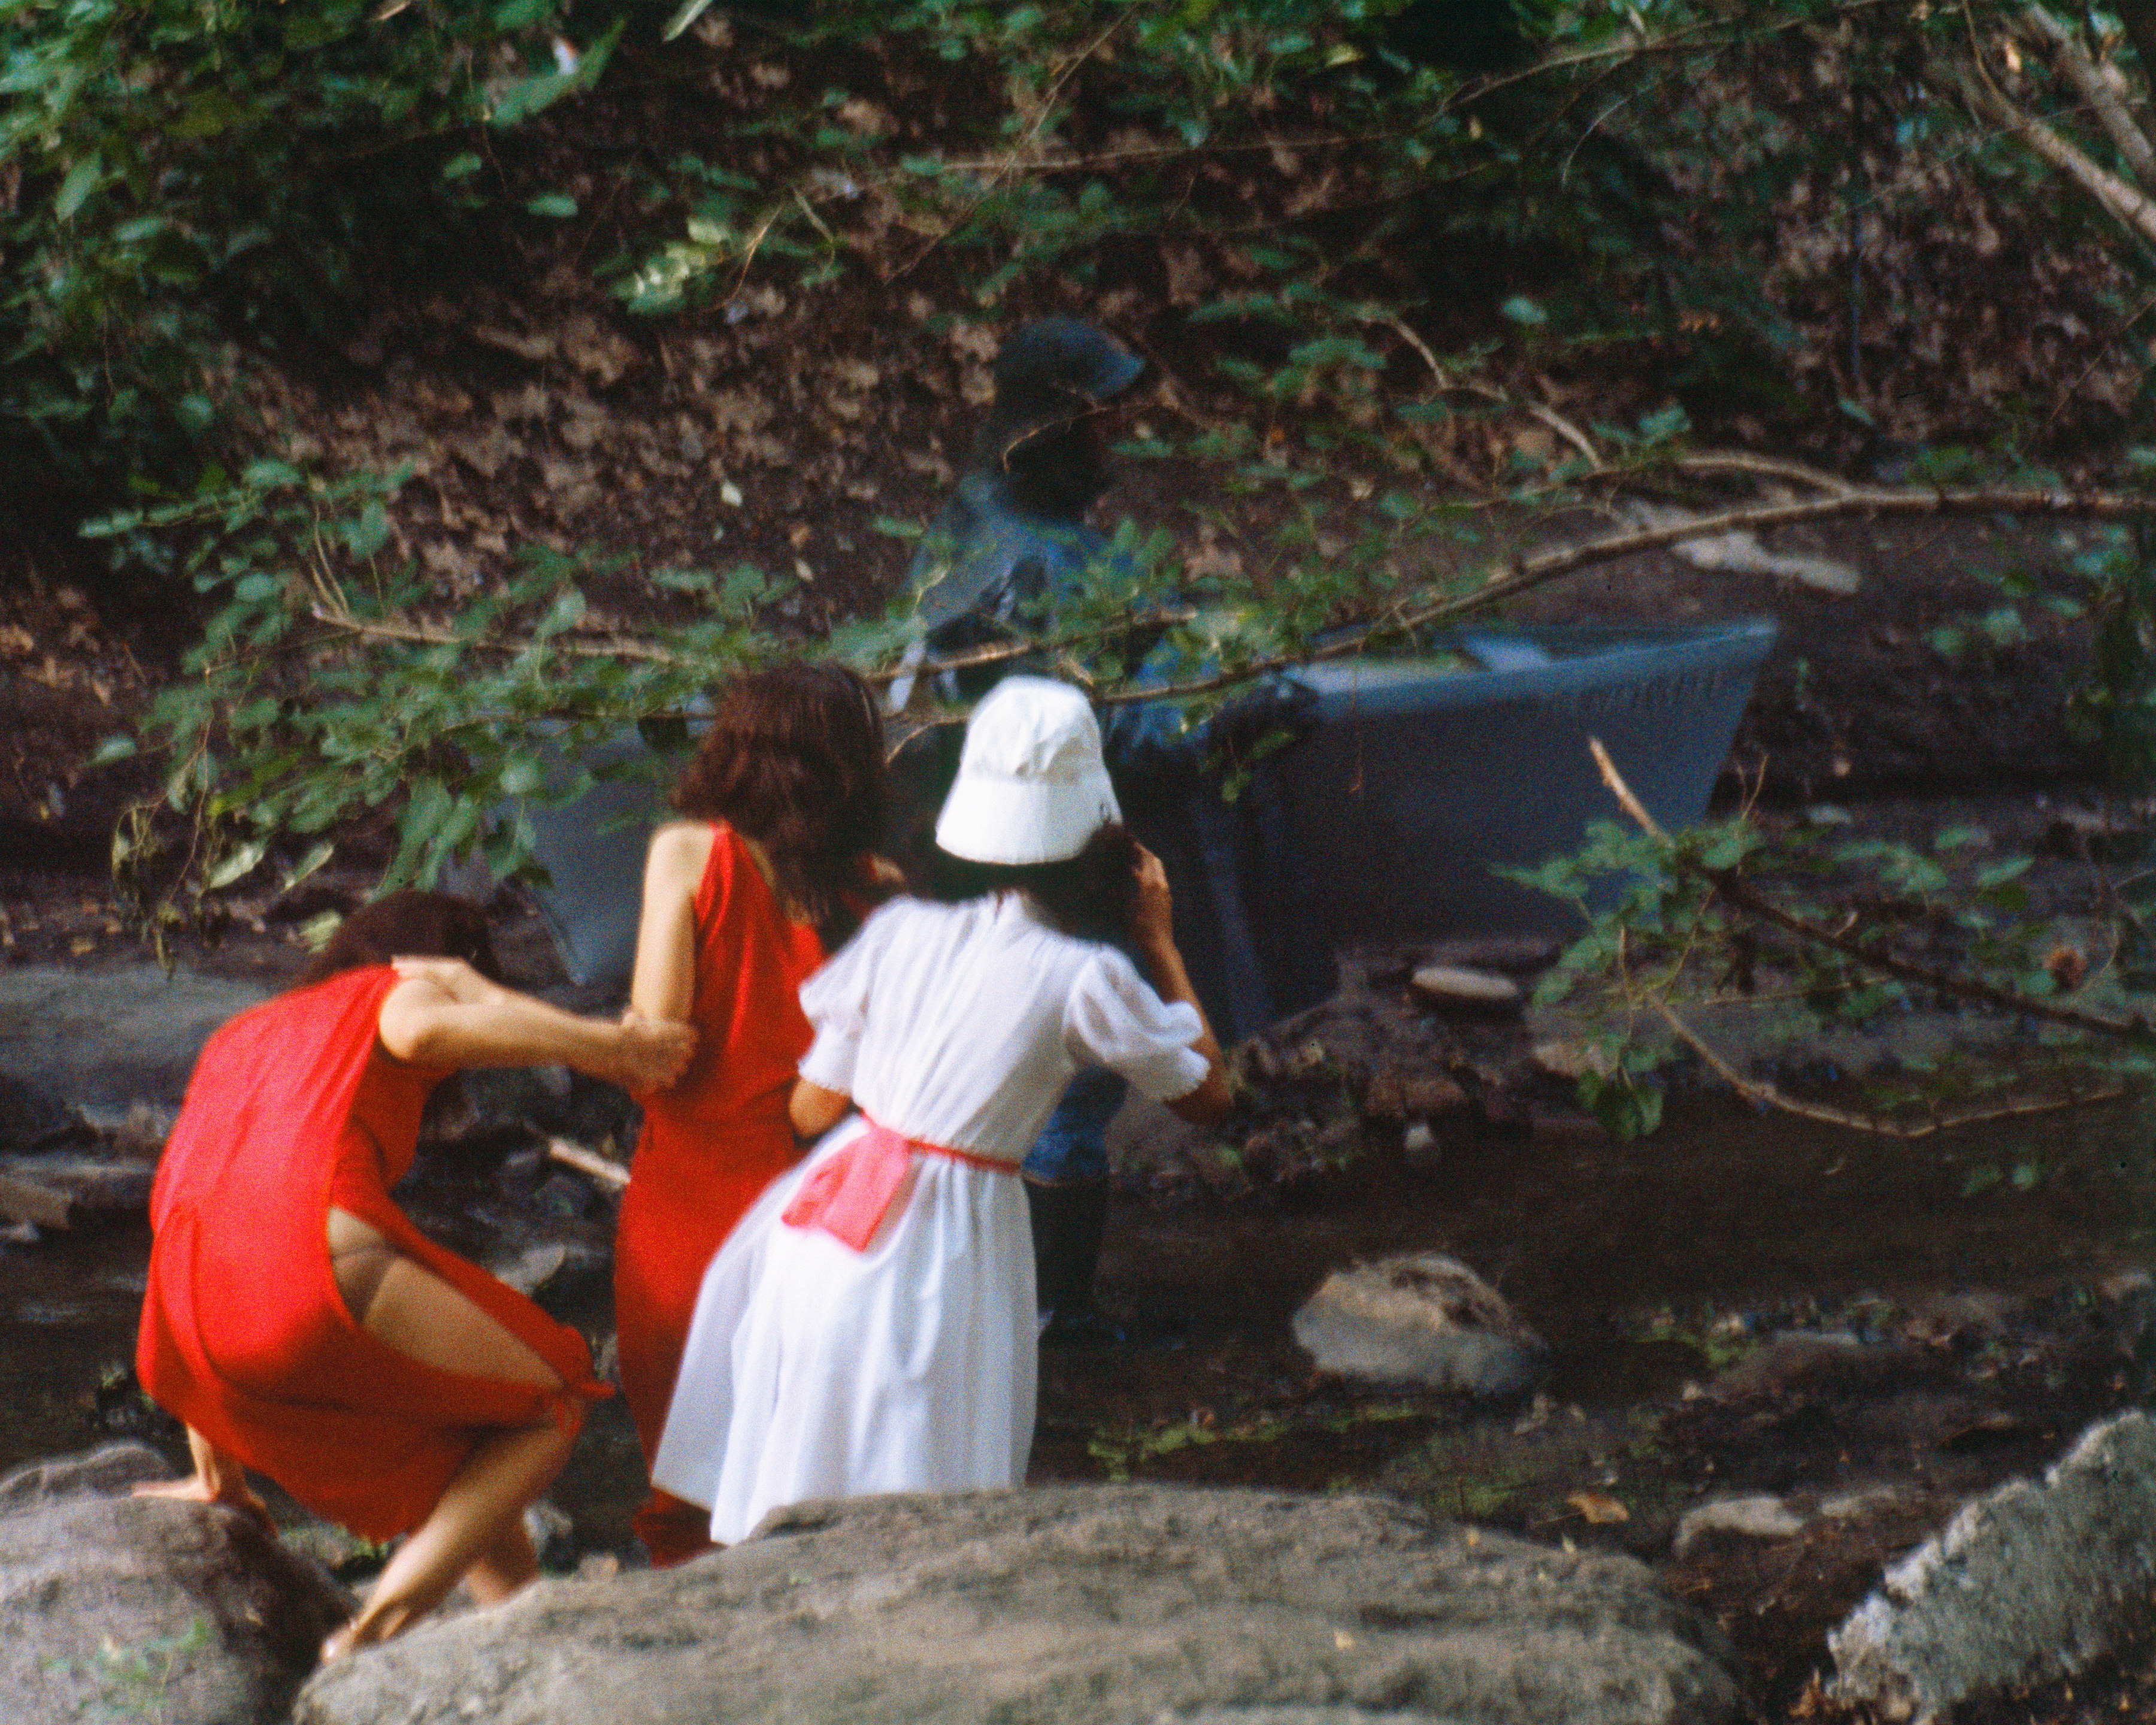 Rivers, First Draft: The three enter the stream, 1982/2015, Digital C-print from Kodachrome 35mm slides in 48 parts, 16h x 20w in (40.64h x 50.80w cm)